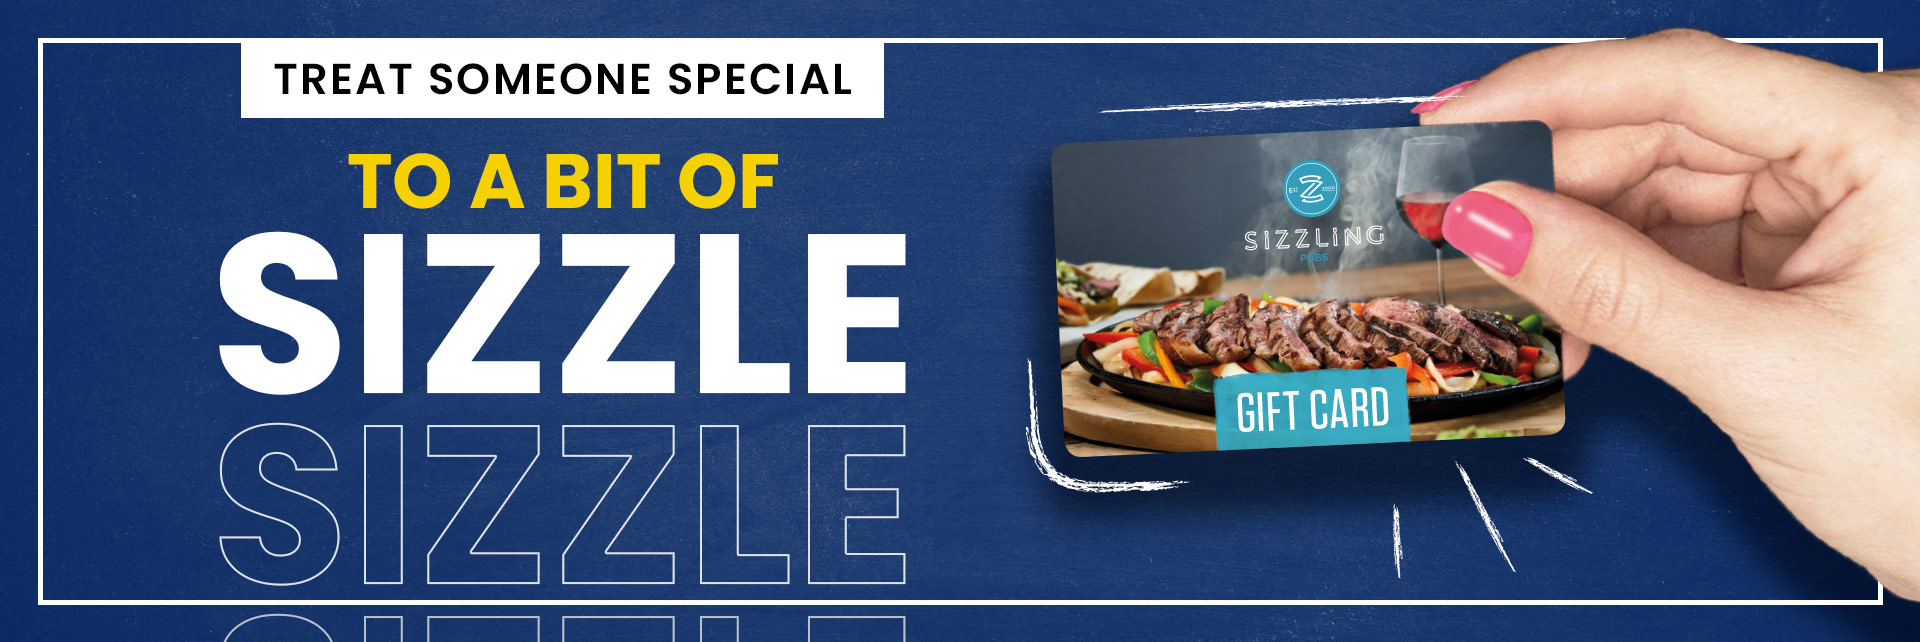 Sizzling Pubs Gift Card at The Rose & Crown, Redditch in Redditch